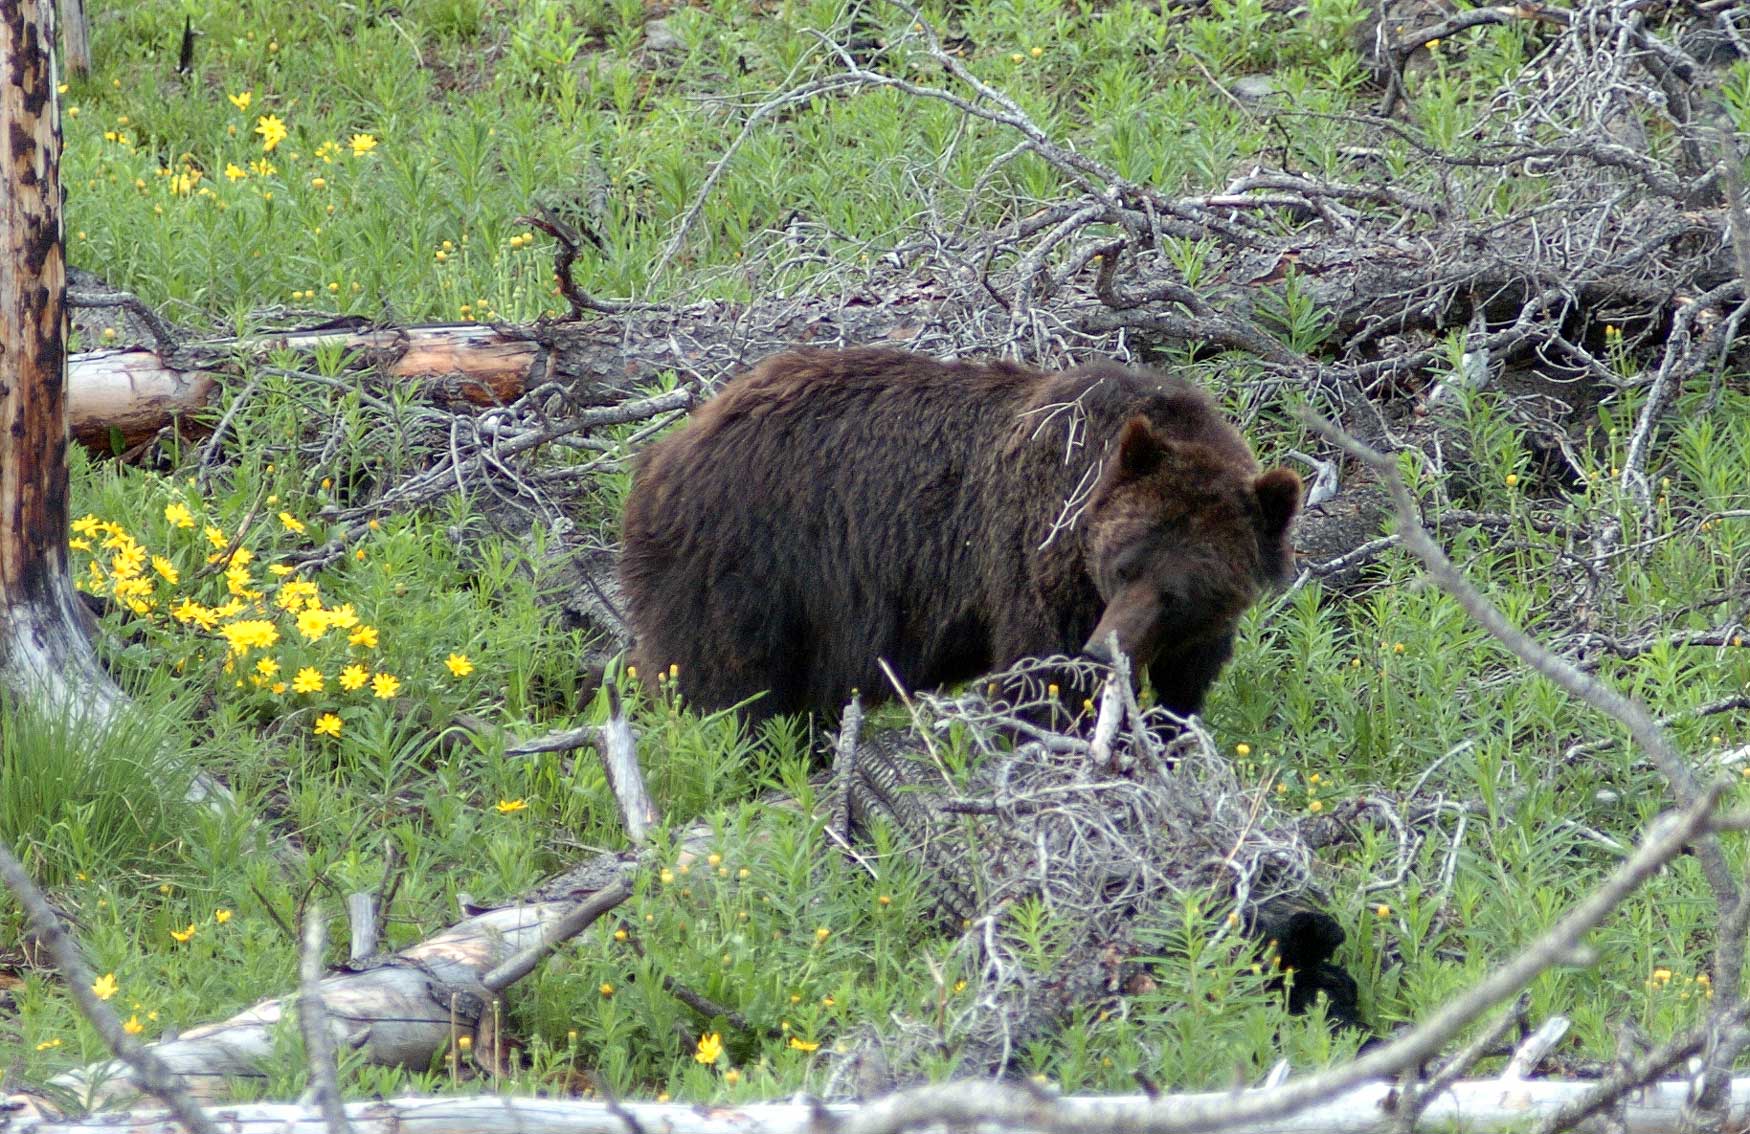 A subadult grizzly bear scans the ground near Cub Creek on the east side of Yellowstone National Park. (Yellowstone Gate file photo by Ruffin Prevost - click to enlarge)